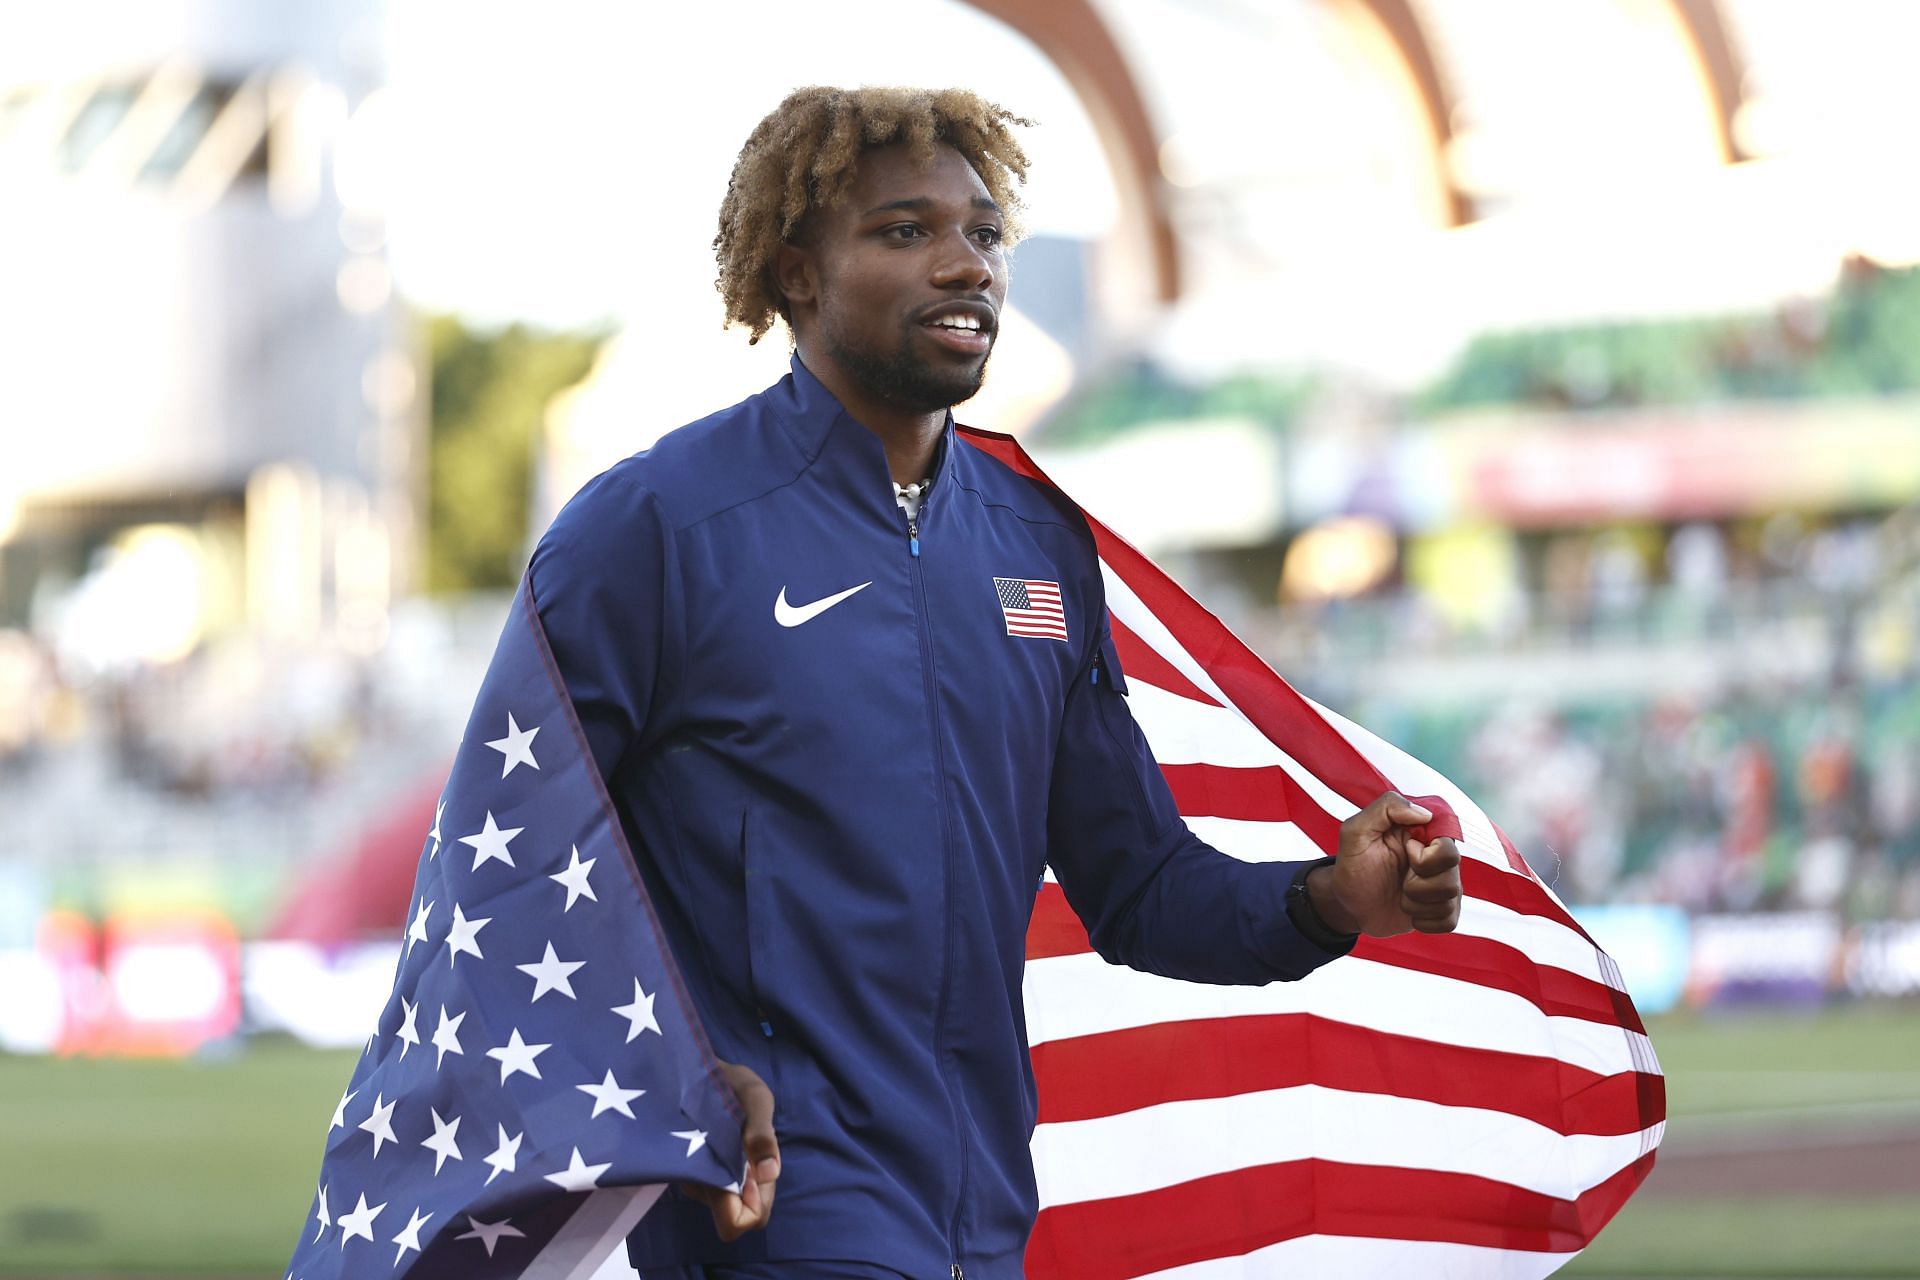 Noah Lyles during the closing ceremony of the 2022 World Athletics Championships in Eugene, Oregon